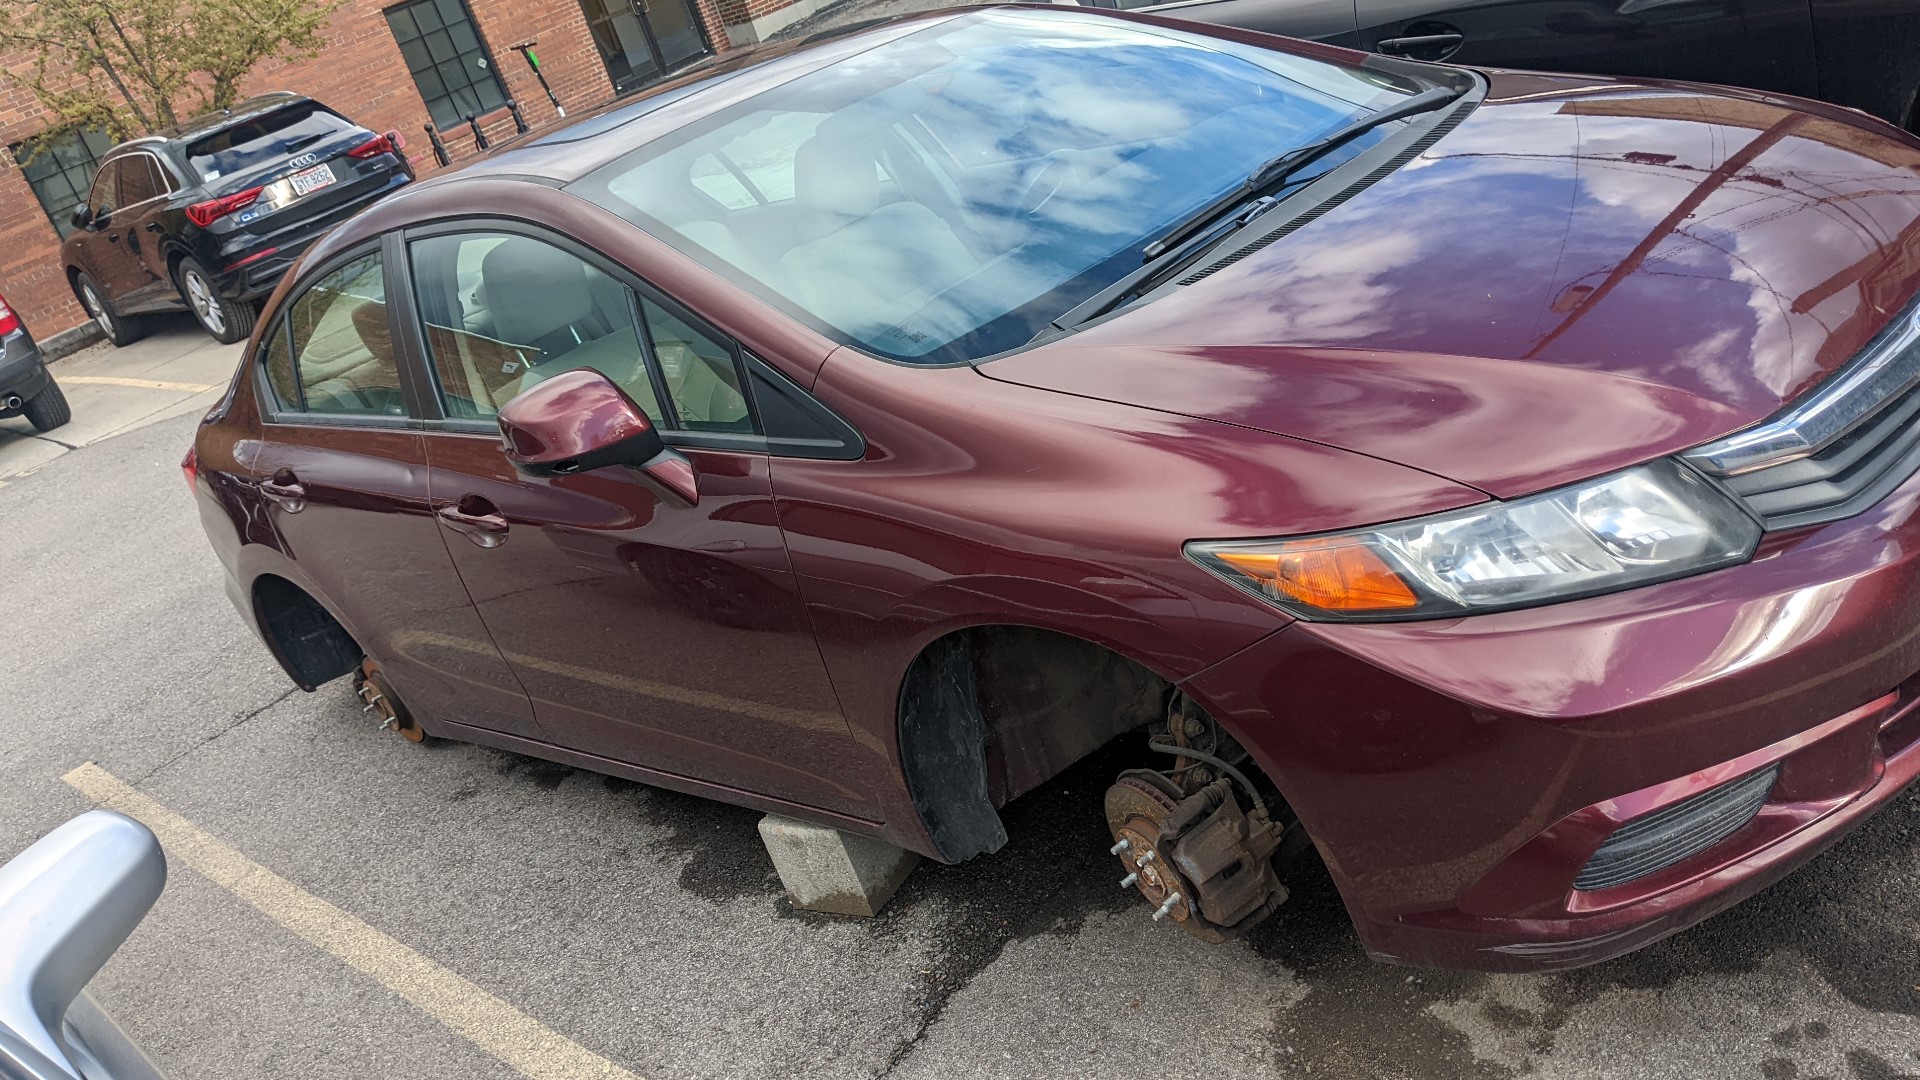 Tires and rims have become a hot commodity. Thieves are stripping them under the darkness of night from parked vehicles leaving owners deflated.